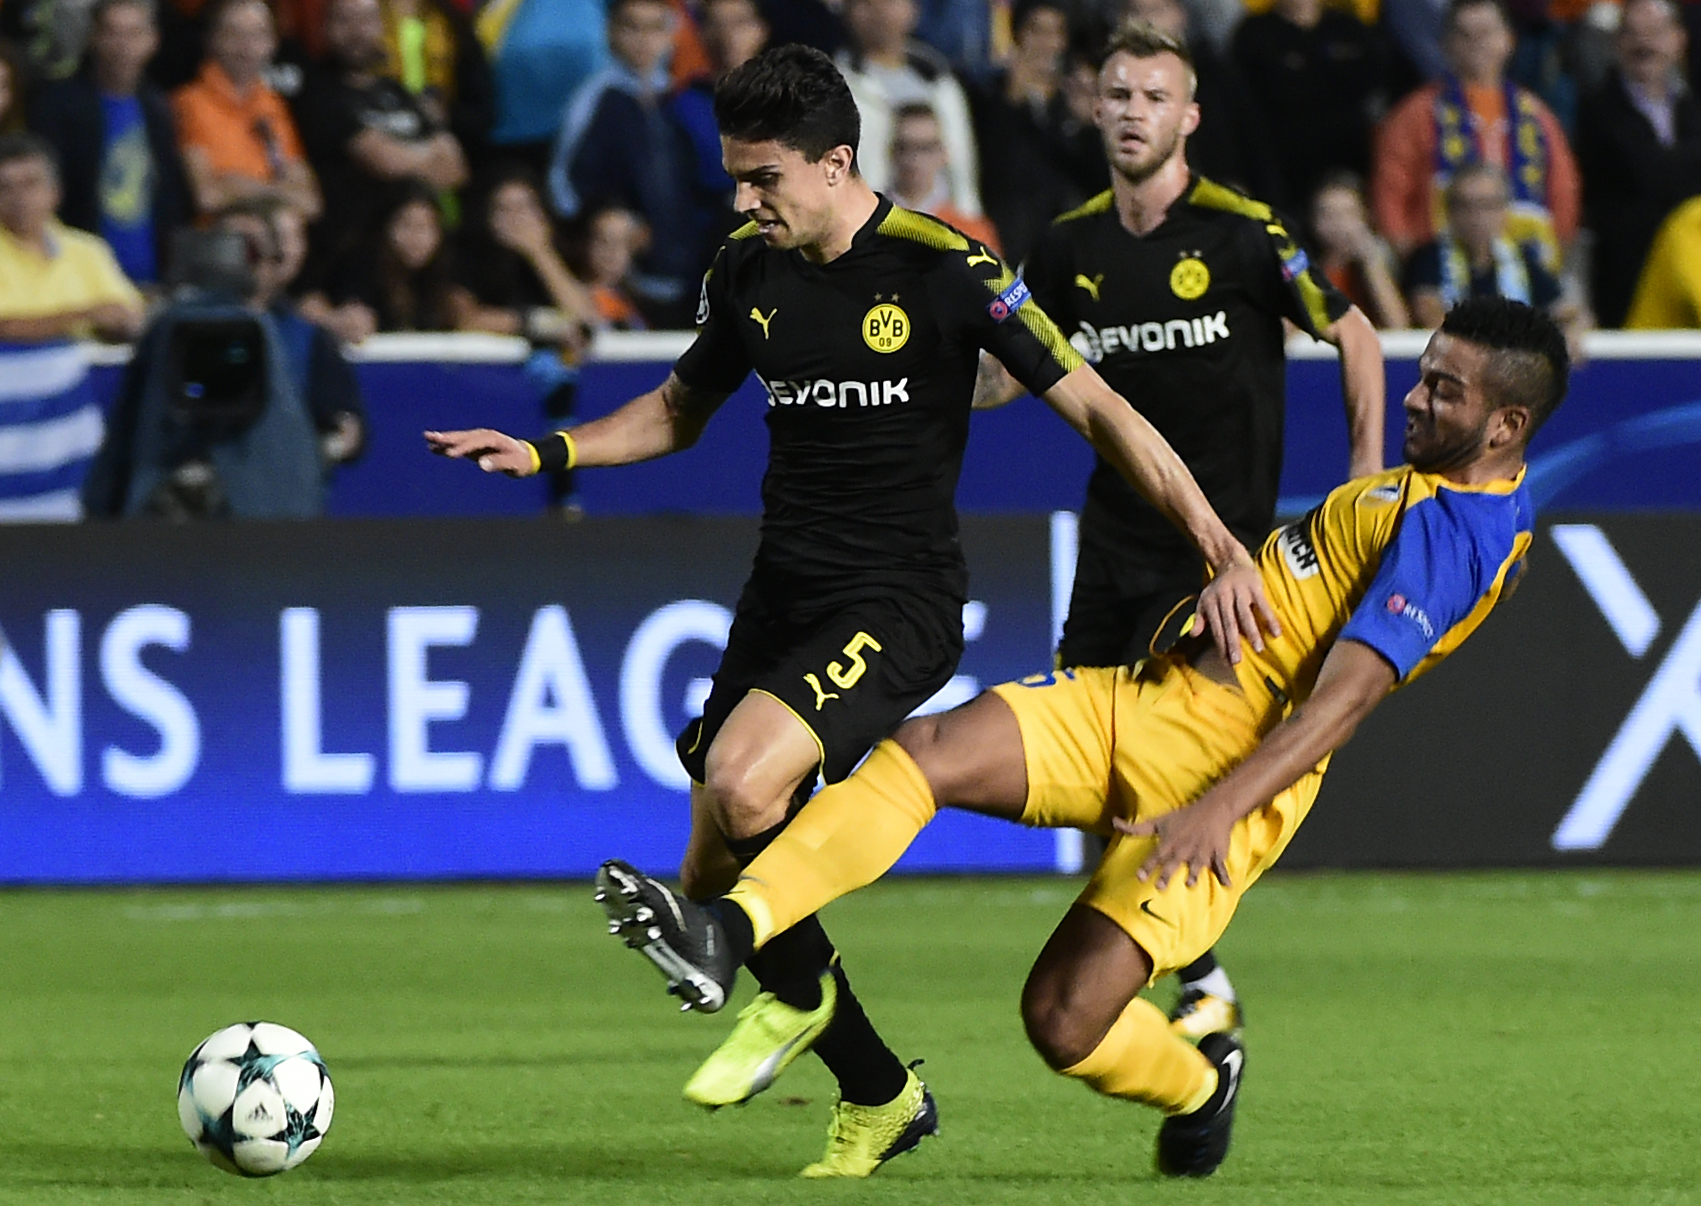 Dortmund's Spanish defender Marc Bartra (L) is tackled by APOEL Nicosia's Dutch forward Lorenzo Ebicilio (R) during the UEFA Champions League football match between Apoel FC and Borussia Dortmund at the GSP Stadium in the Cypriot capital, Nicosia on October 17, 2017.  / AFP PHOTO / KHALED DESOUKI        (Photo credit should read KHALED DESOUKI/AFP/Getty Images)